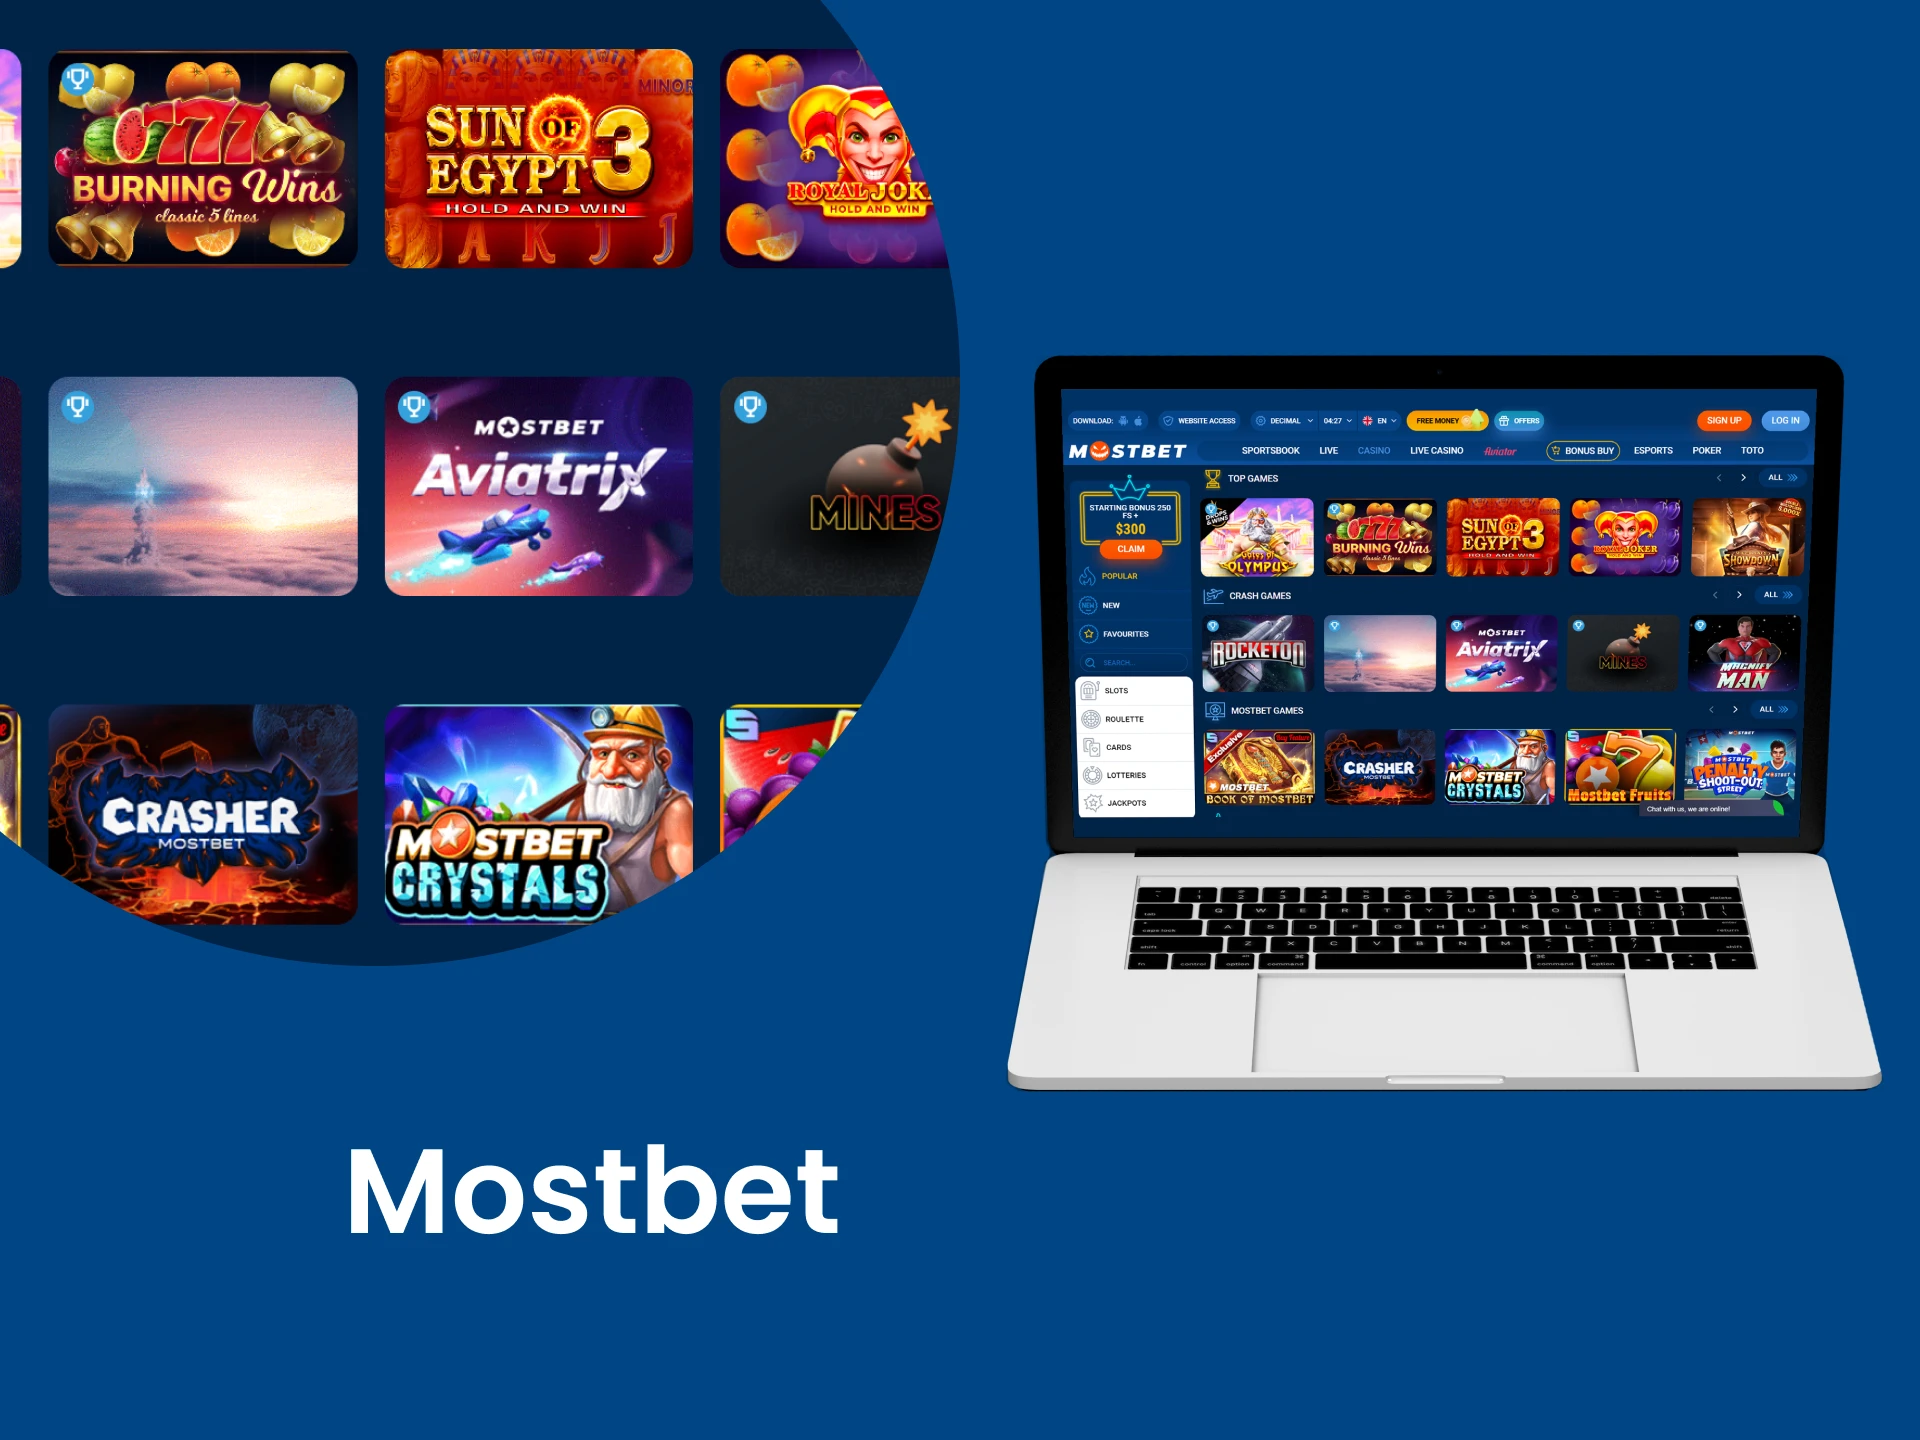 For casino games, choose Mostbet.